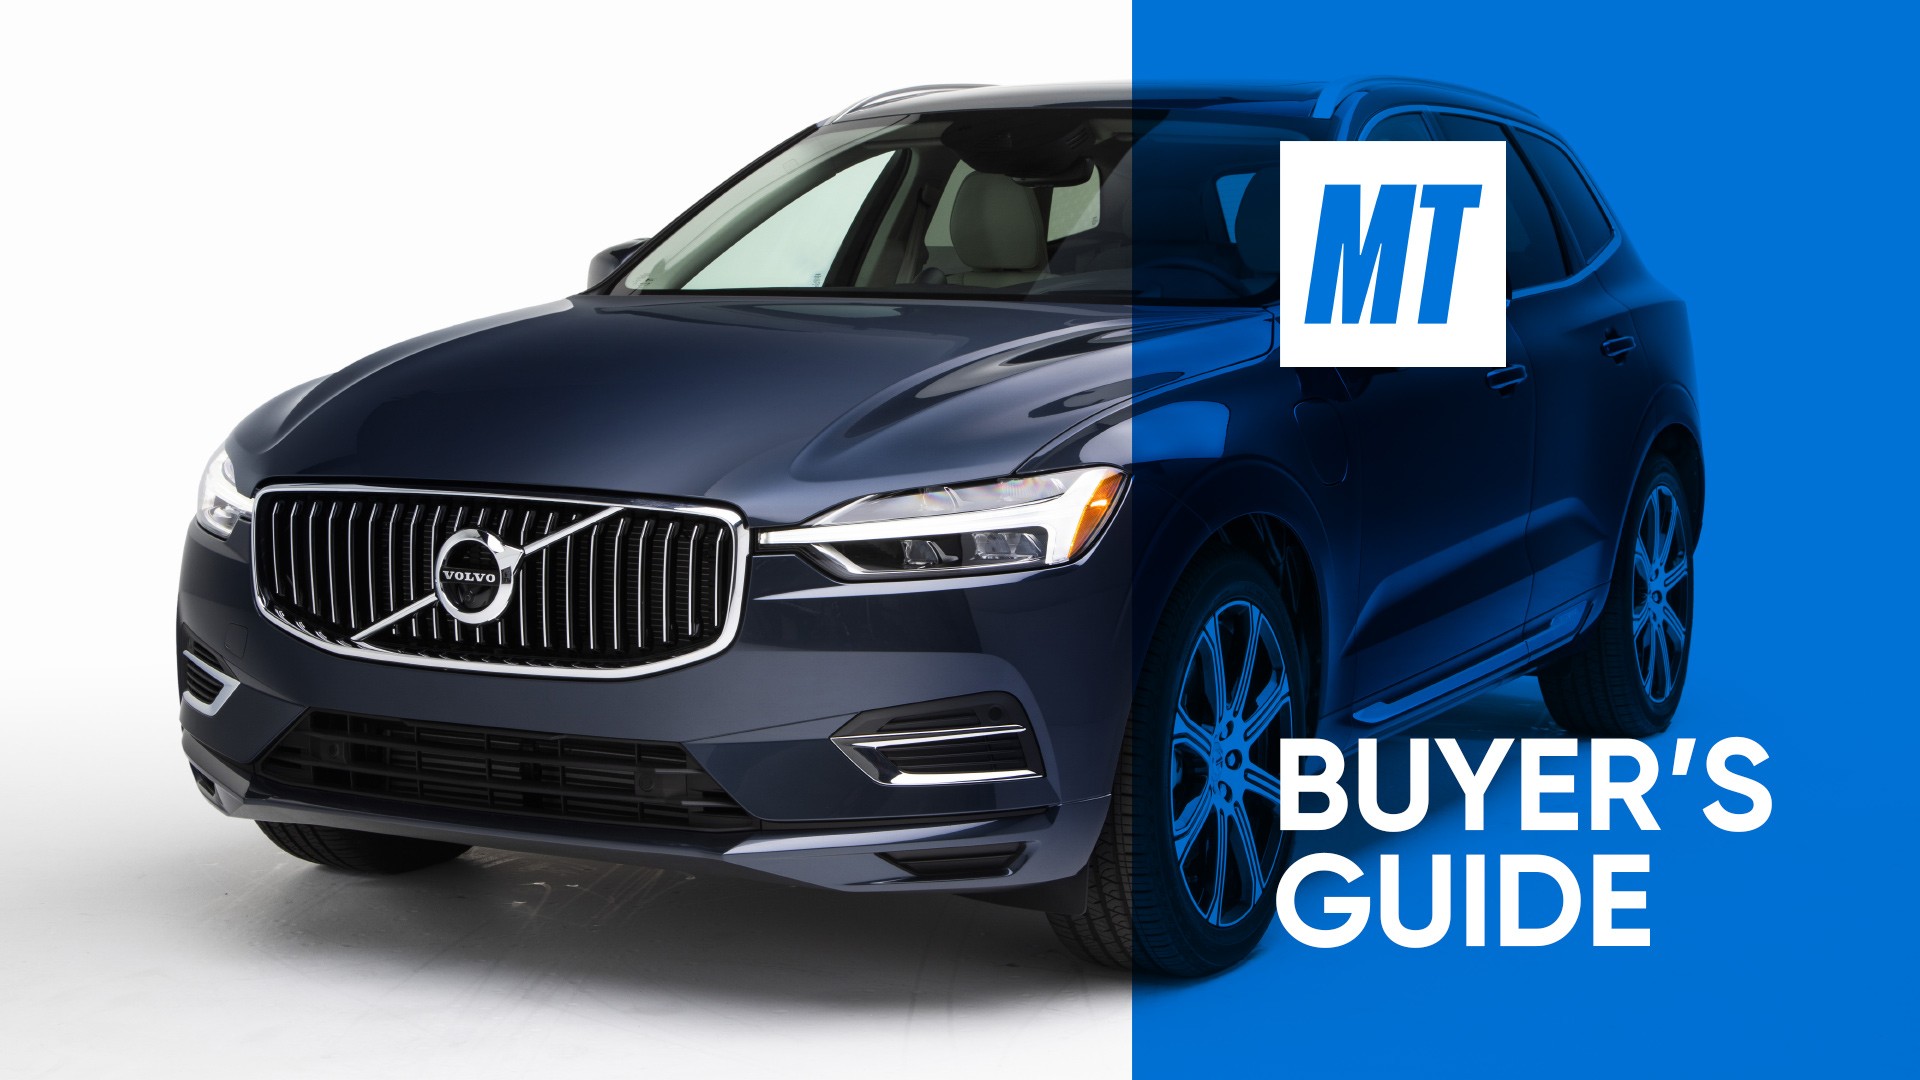 2021 Volvo XC60 Prices, Reviews, and Photos - MotorTrend